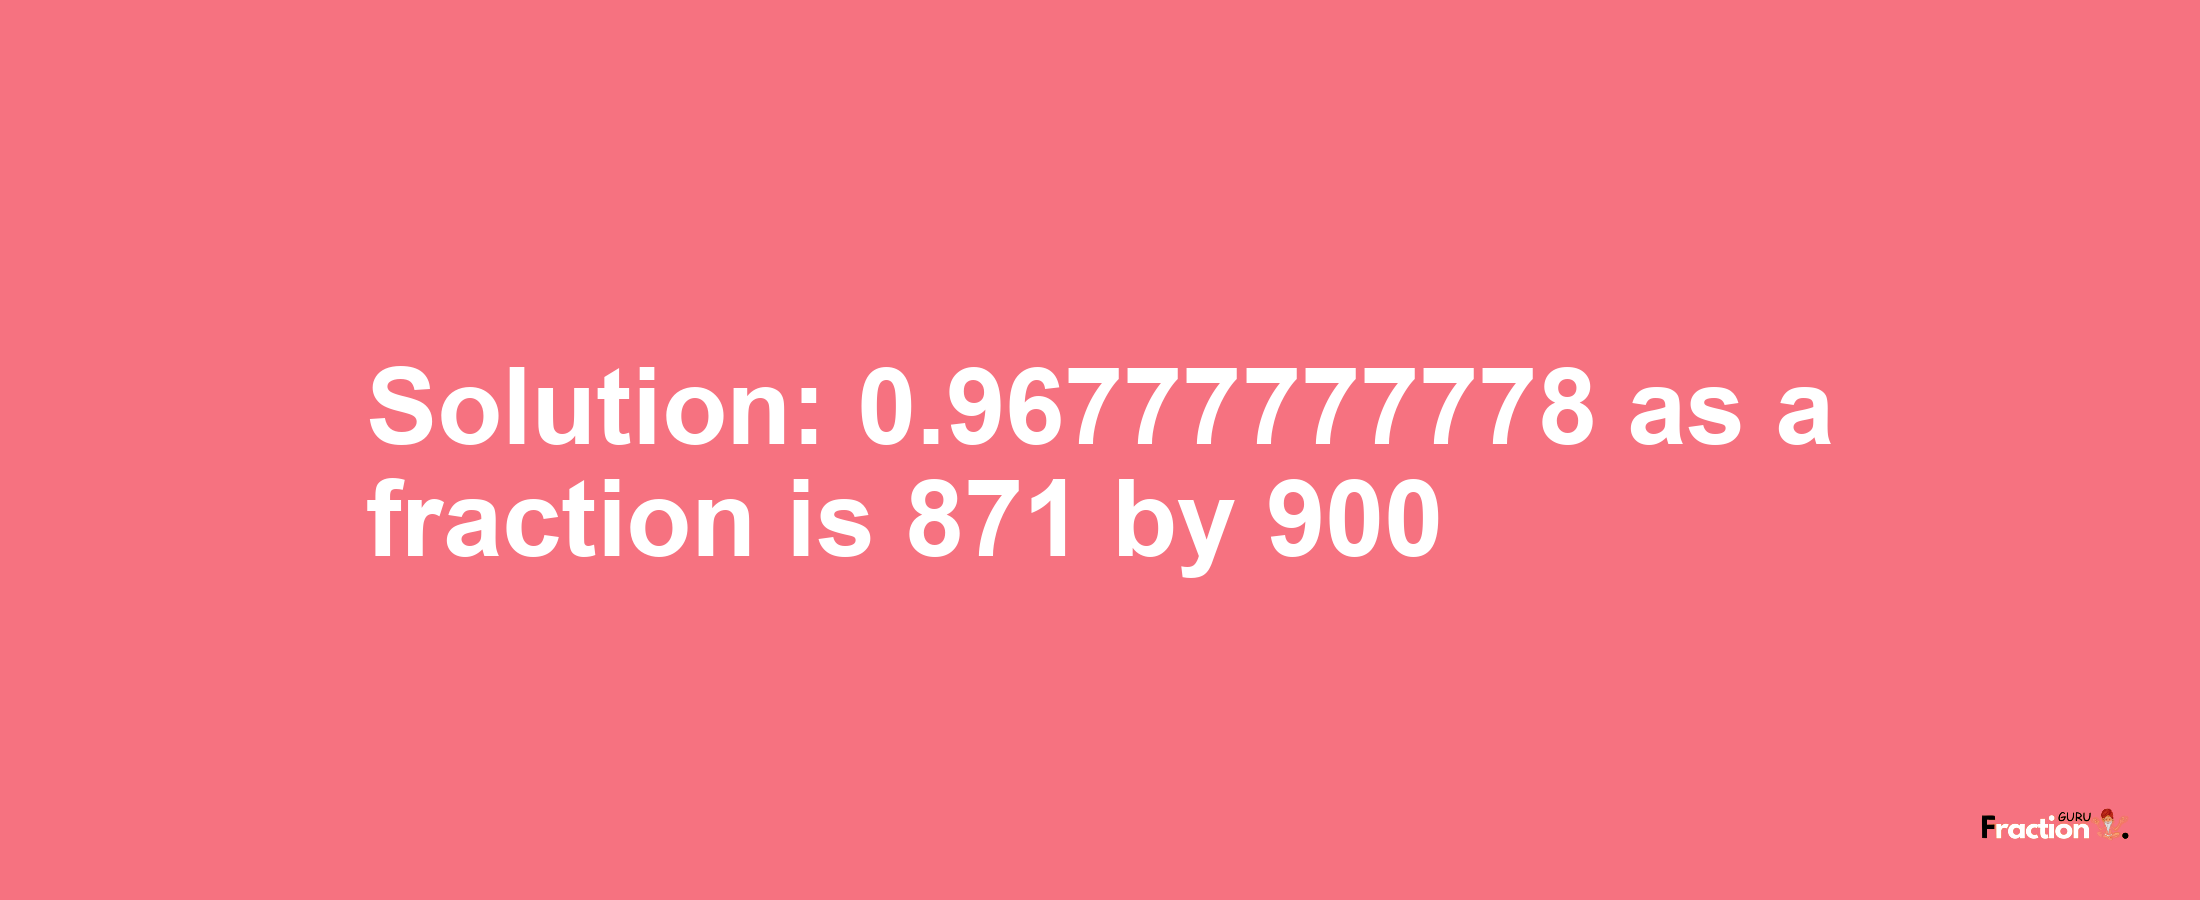 Solution:0.96777777778 as a fraction is 871/900